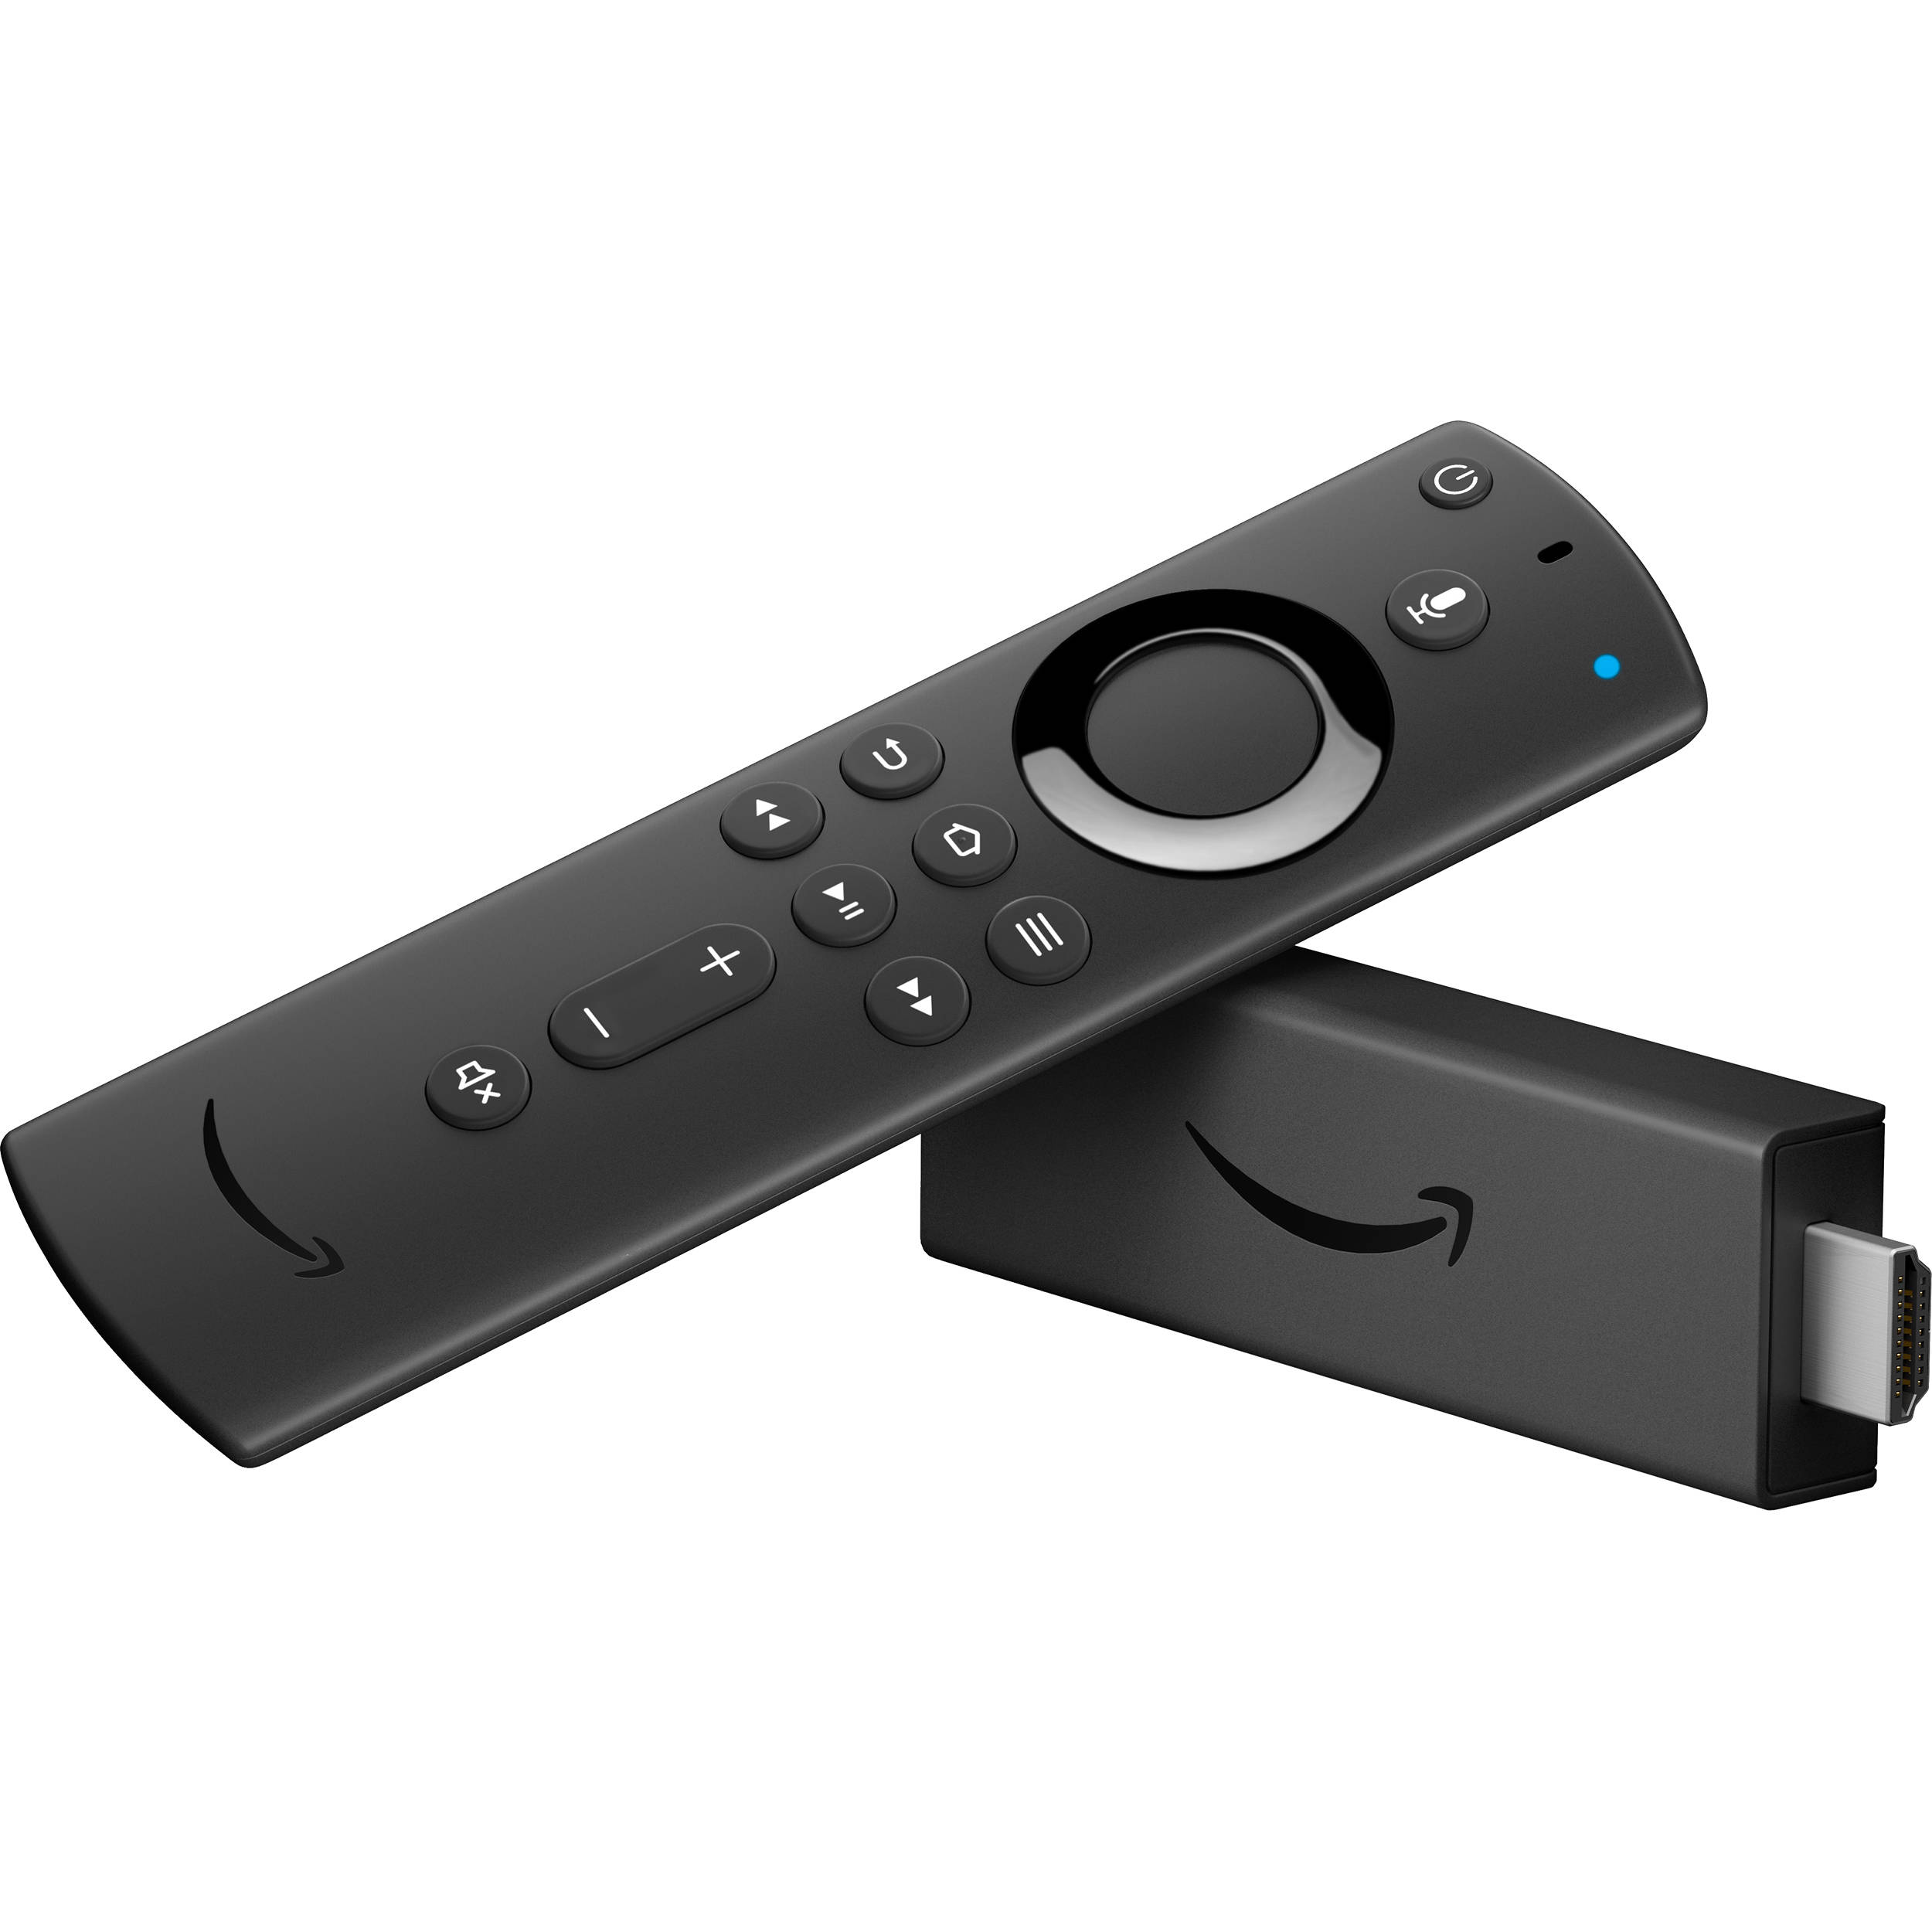 what is the latest amazon fire stick